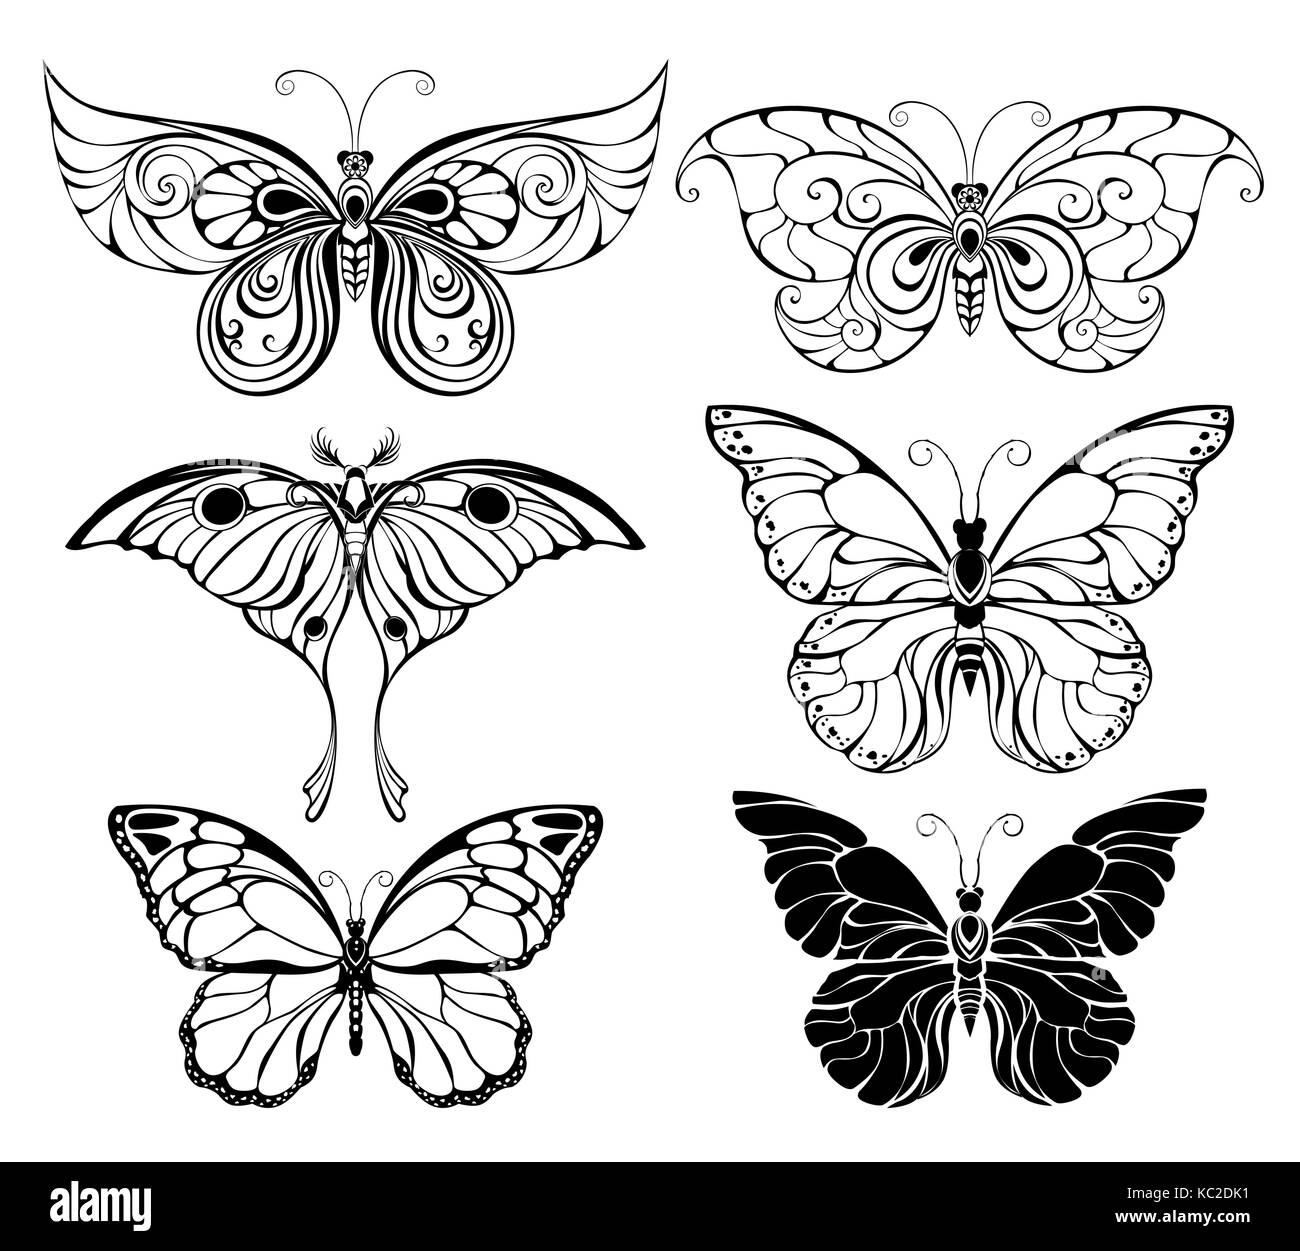 Set of artistically drawn, outline, black butterflies on a white background. Butterflies. Element of design. Stock Vector